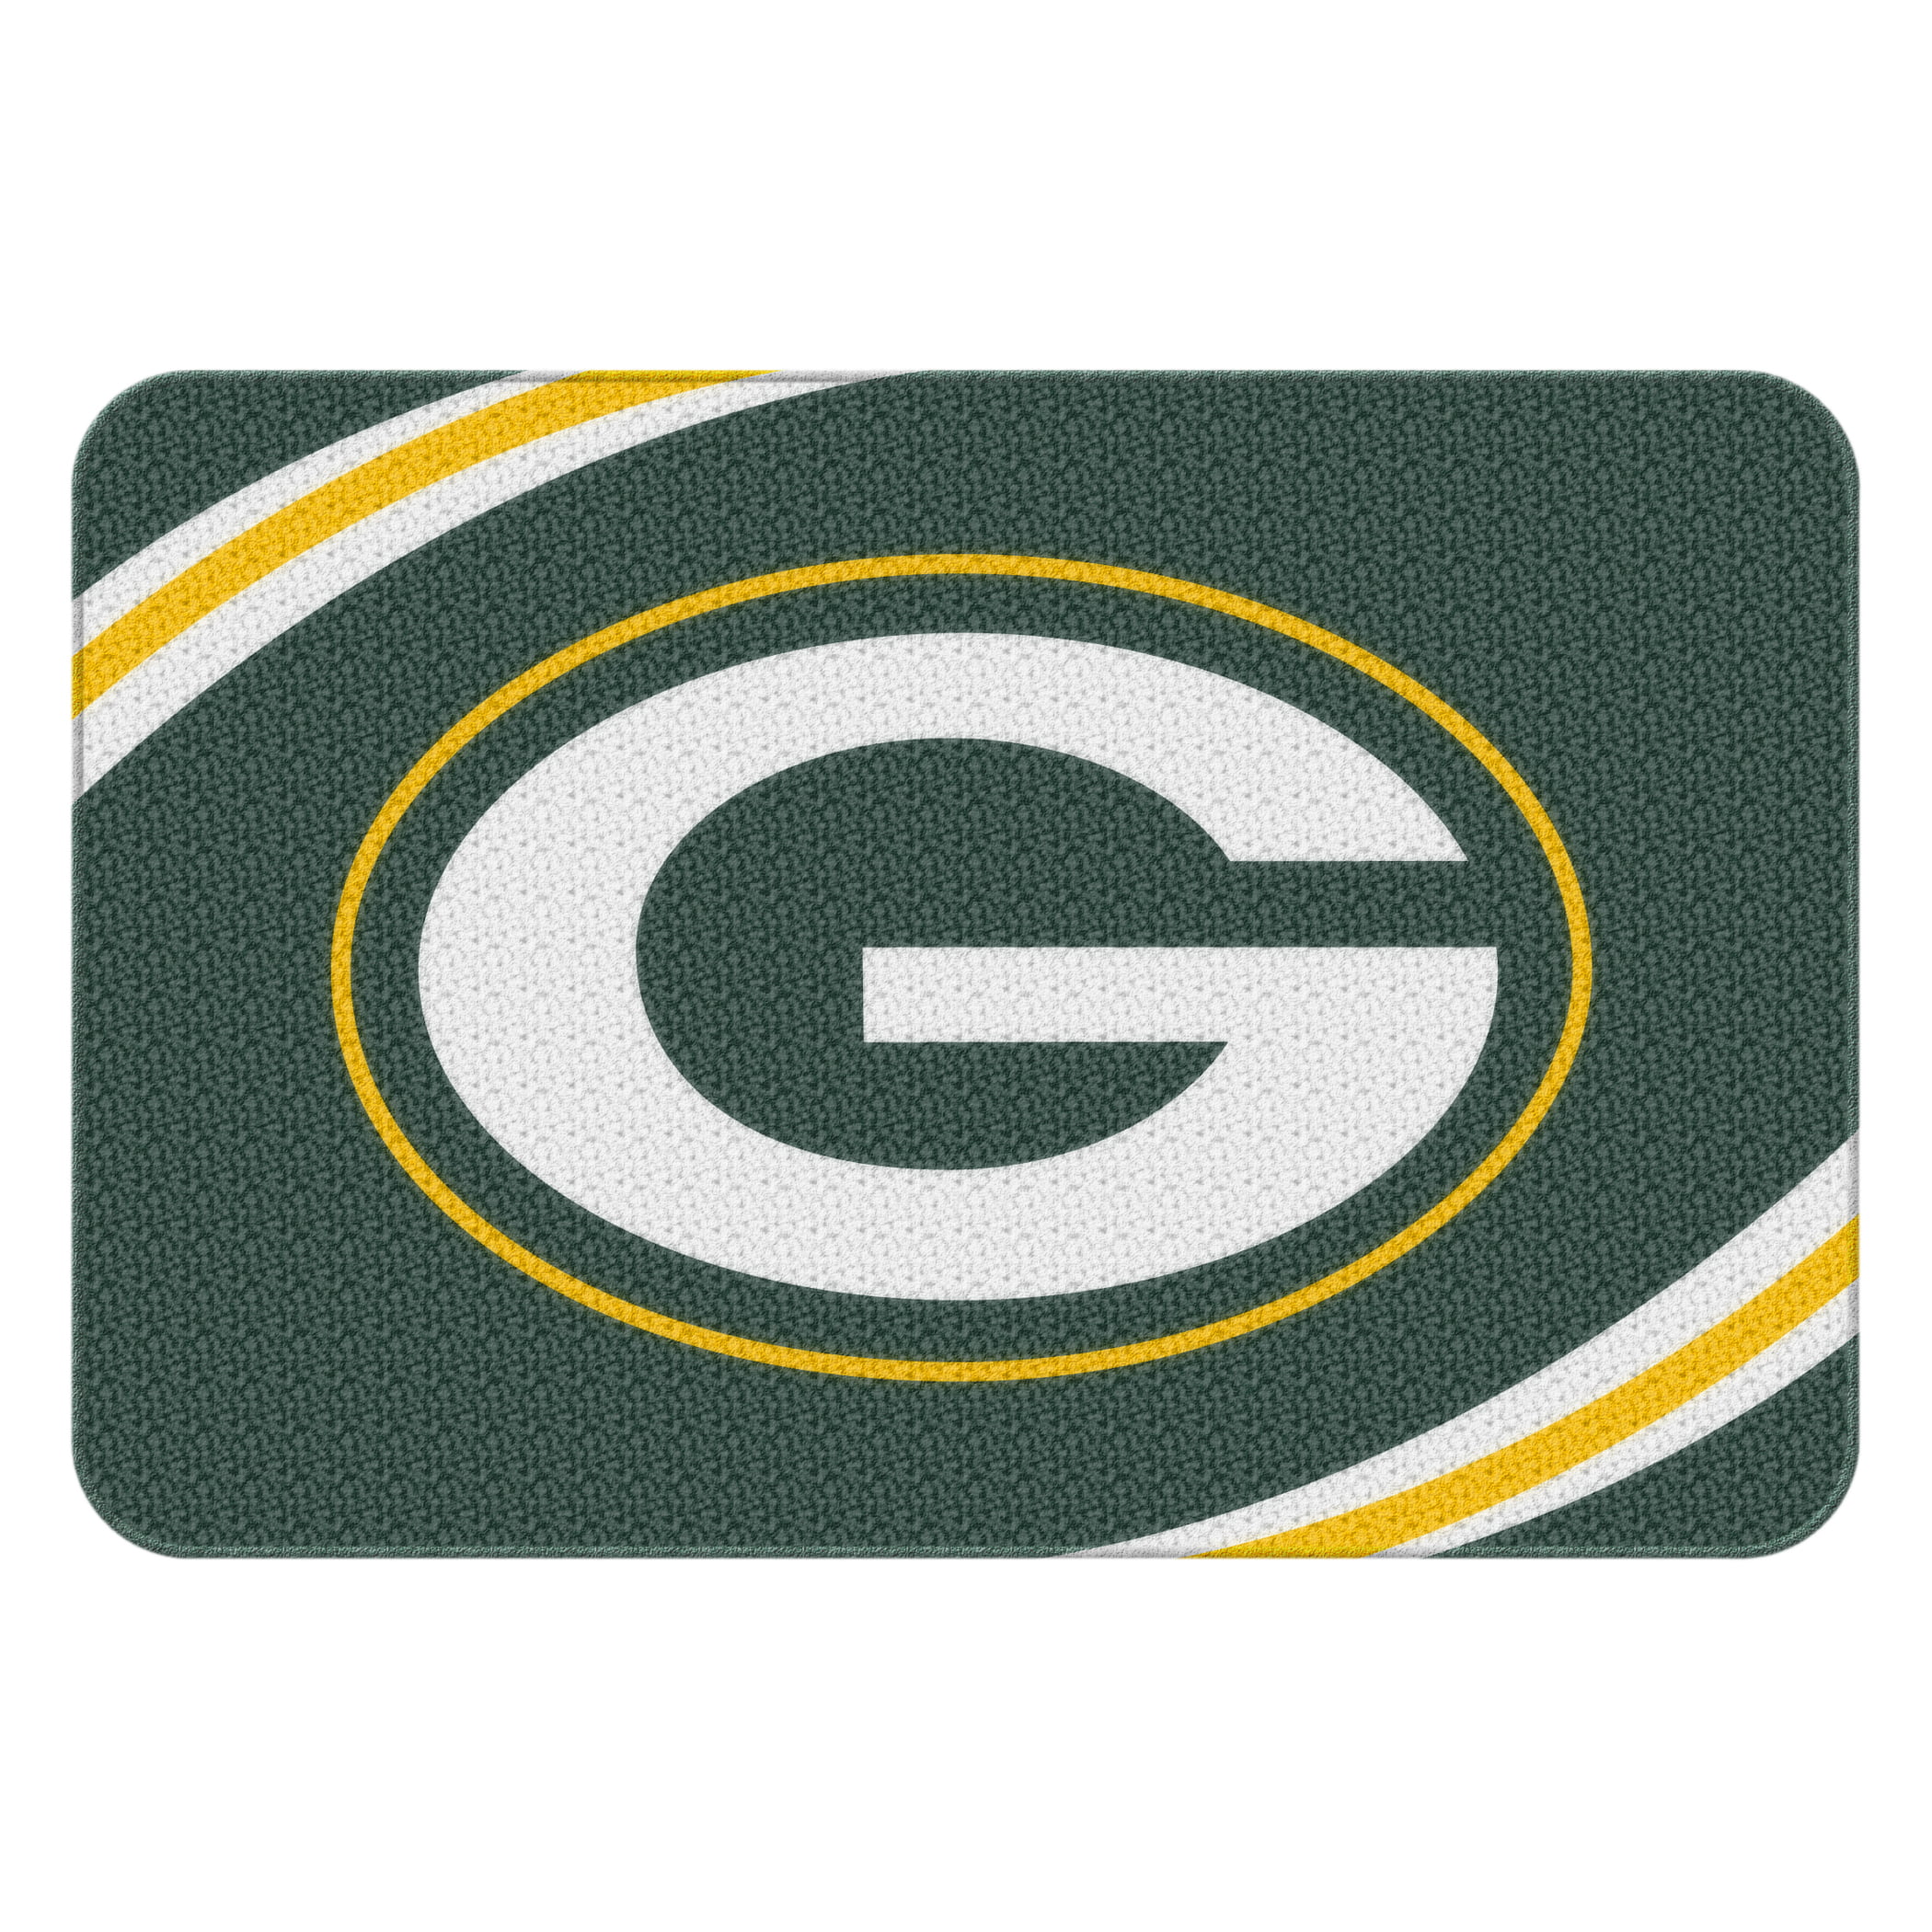 Nfl Green Bay Packers 20 X 30 Round, Green Bay Packers Bathroom Rug Set